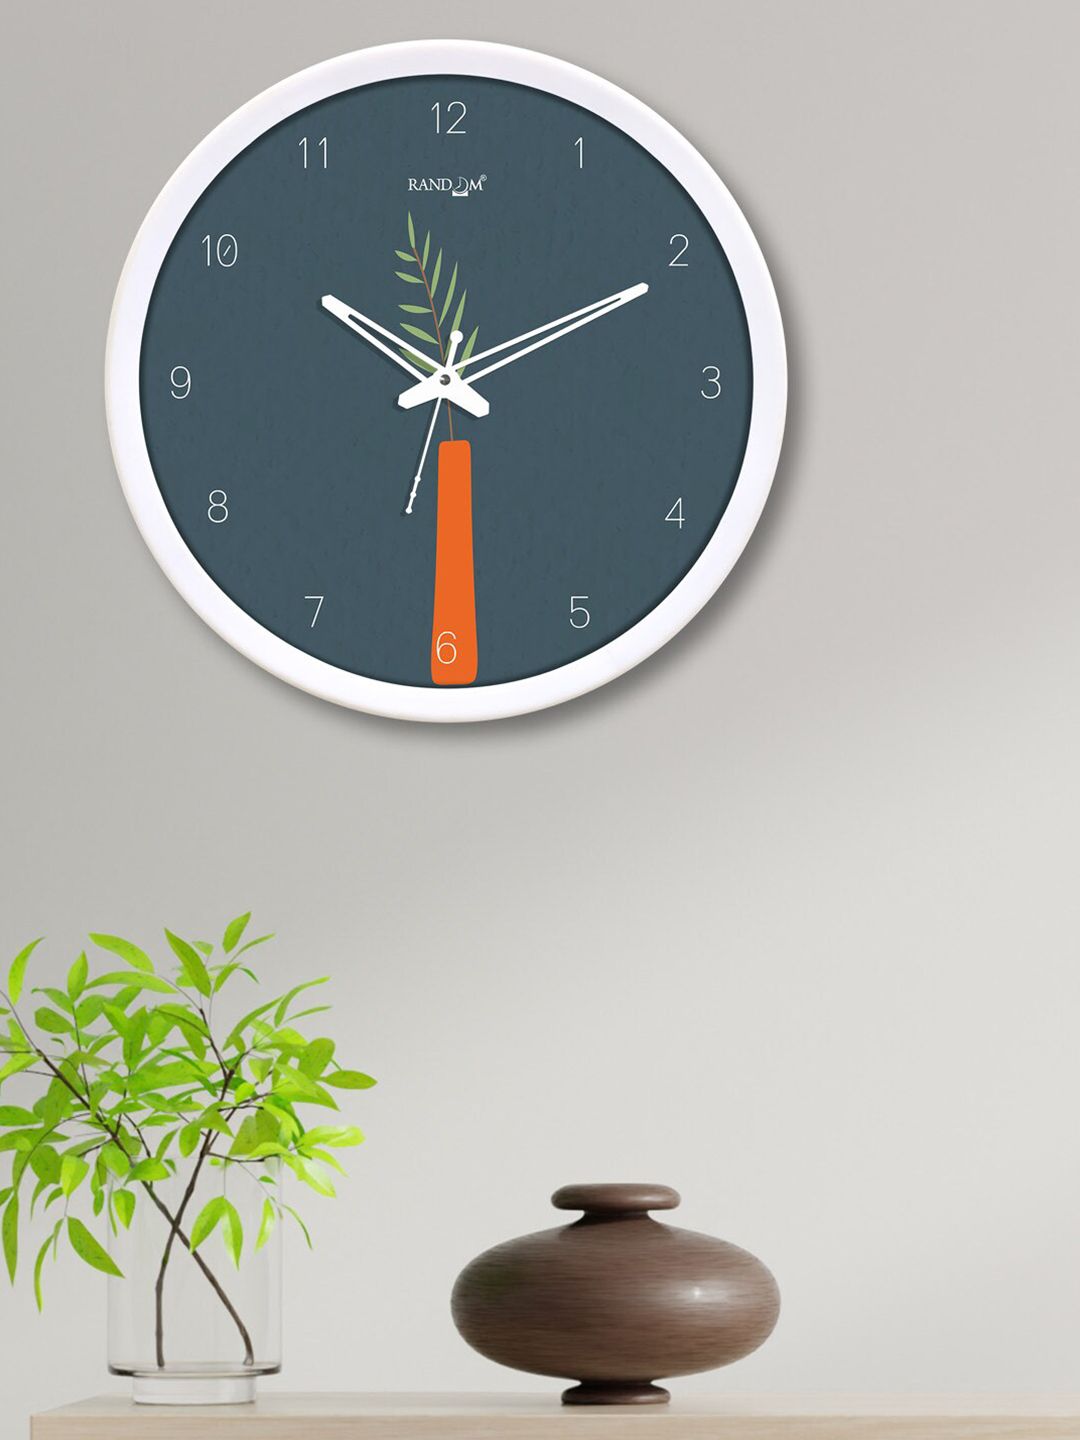 RANDOM Grey & White Printed 30 cm Analogue Contemporary Wall Clock Price in India